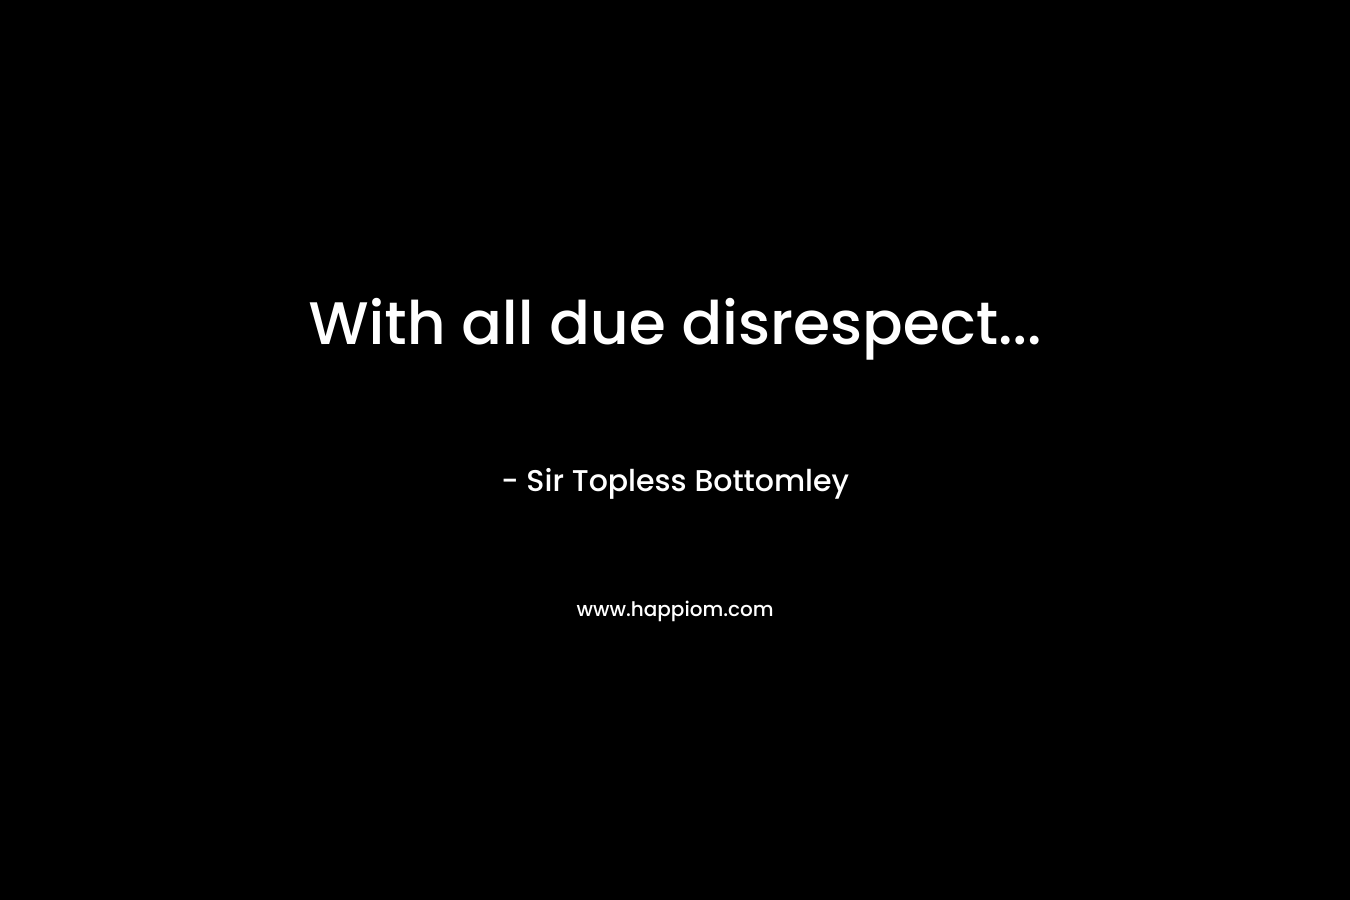  With all due disrespect...